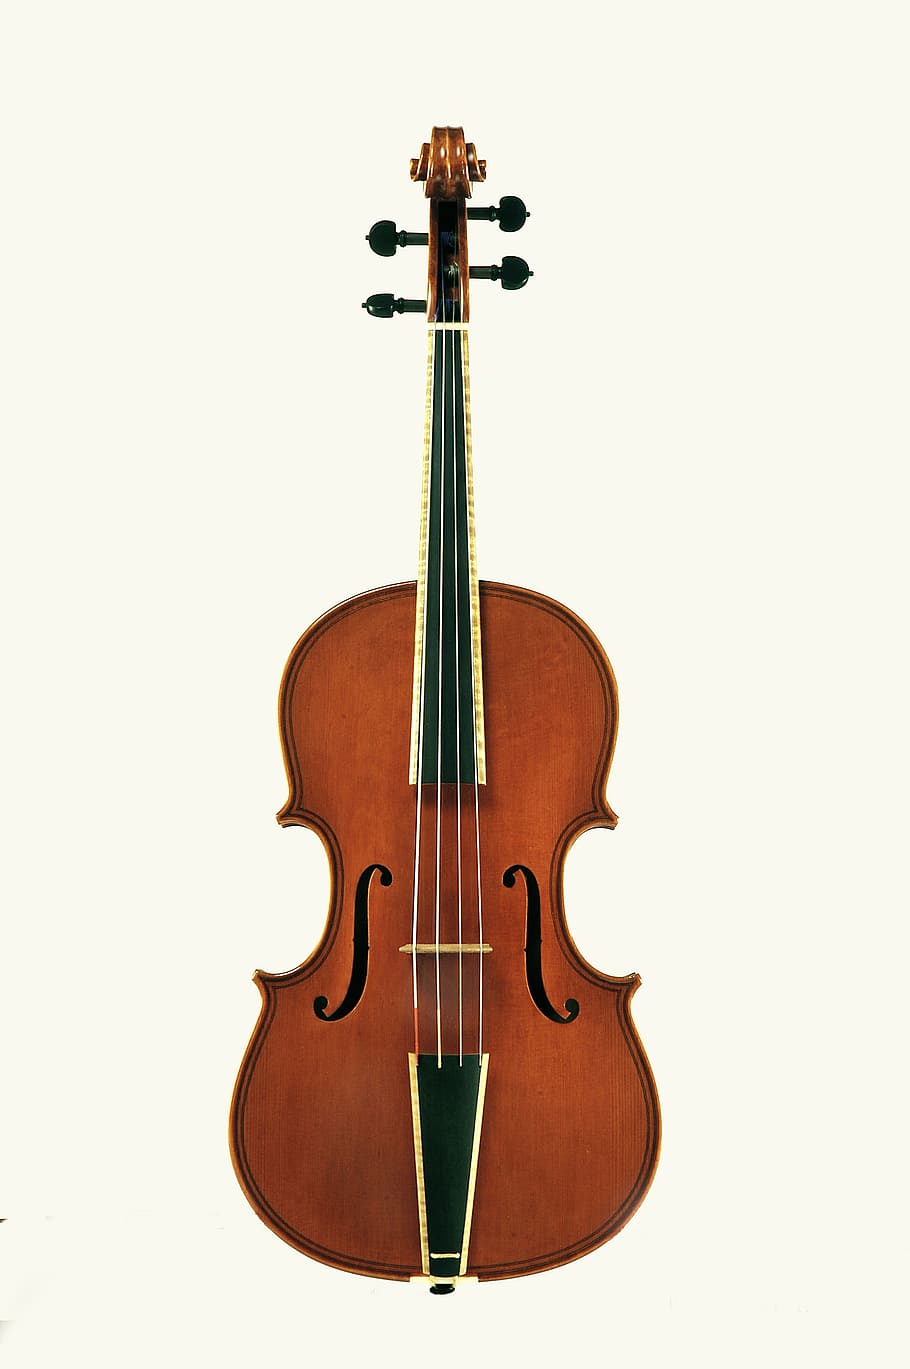 violin, stringed instruments, string instrument, musical equipment, musical instrument, music, studio shot, indoors, white background, arts culture and entertainment